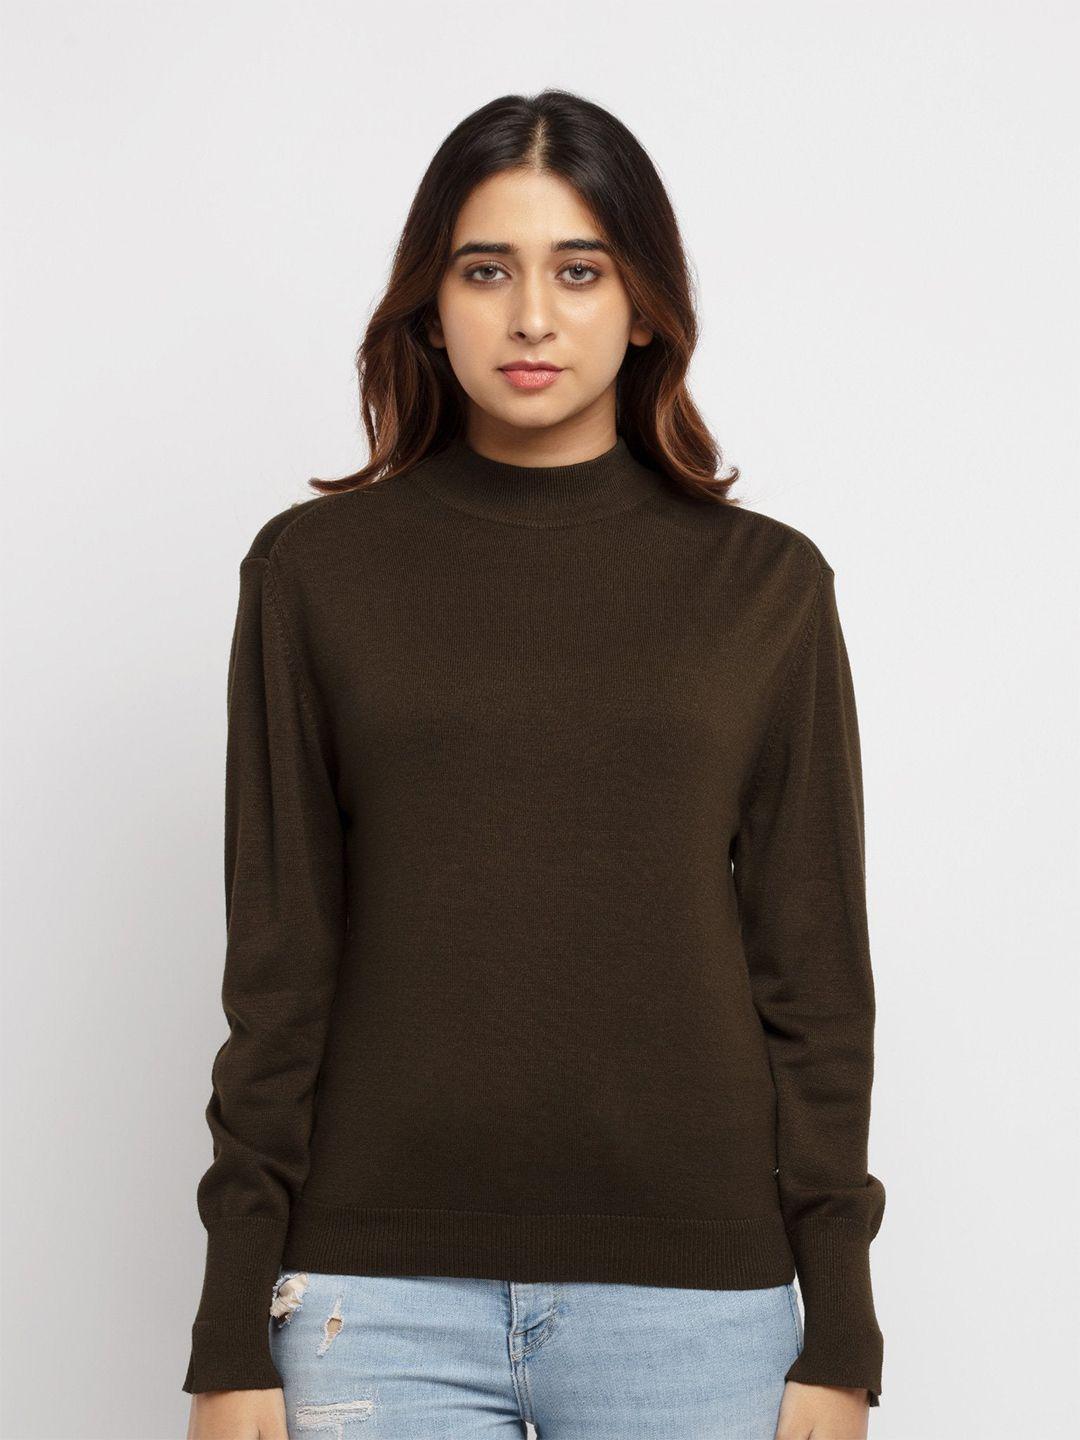 status quo women olive green high neck pullover